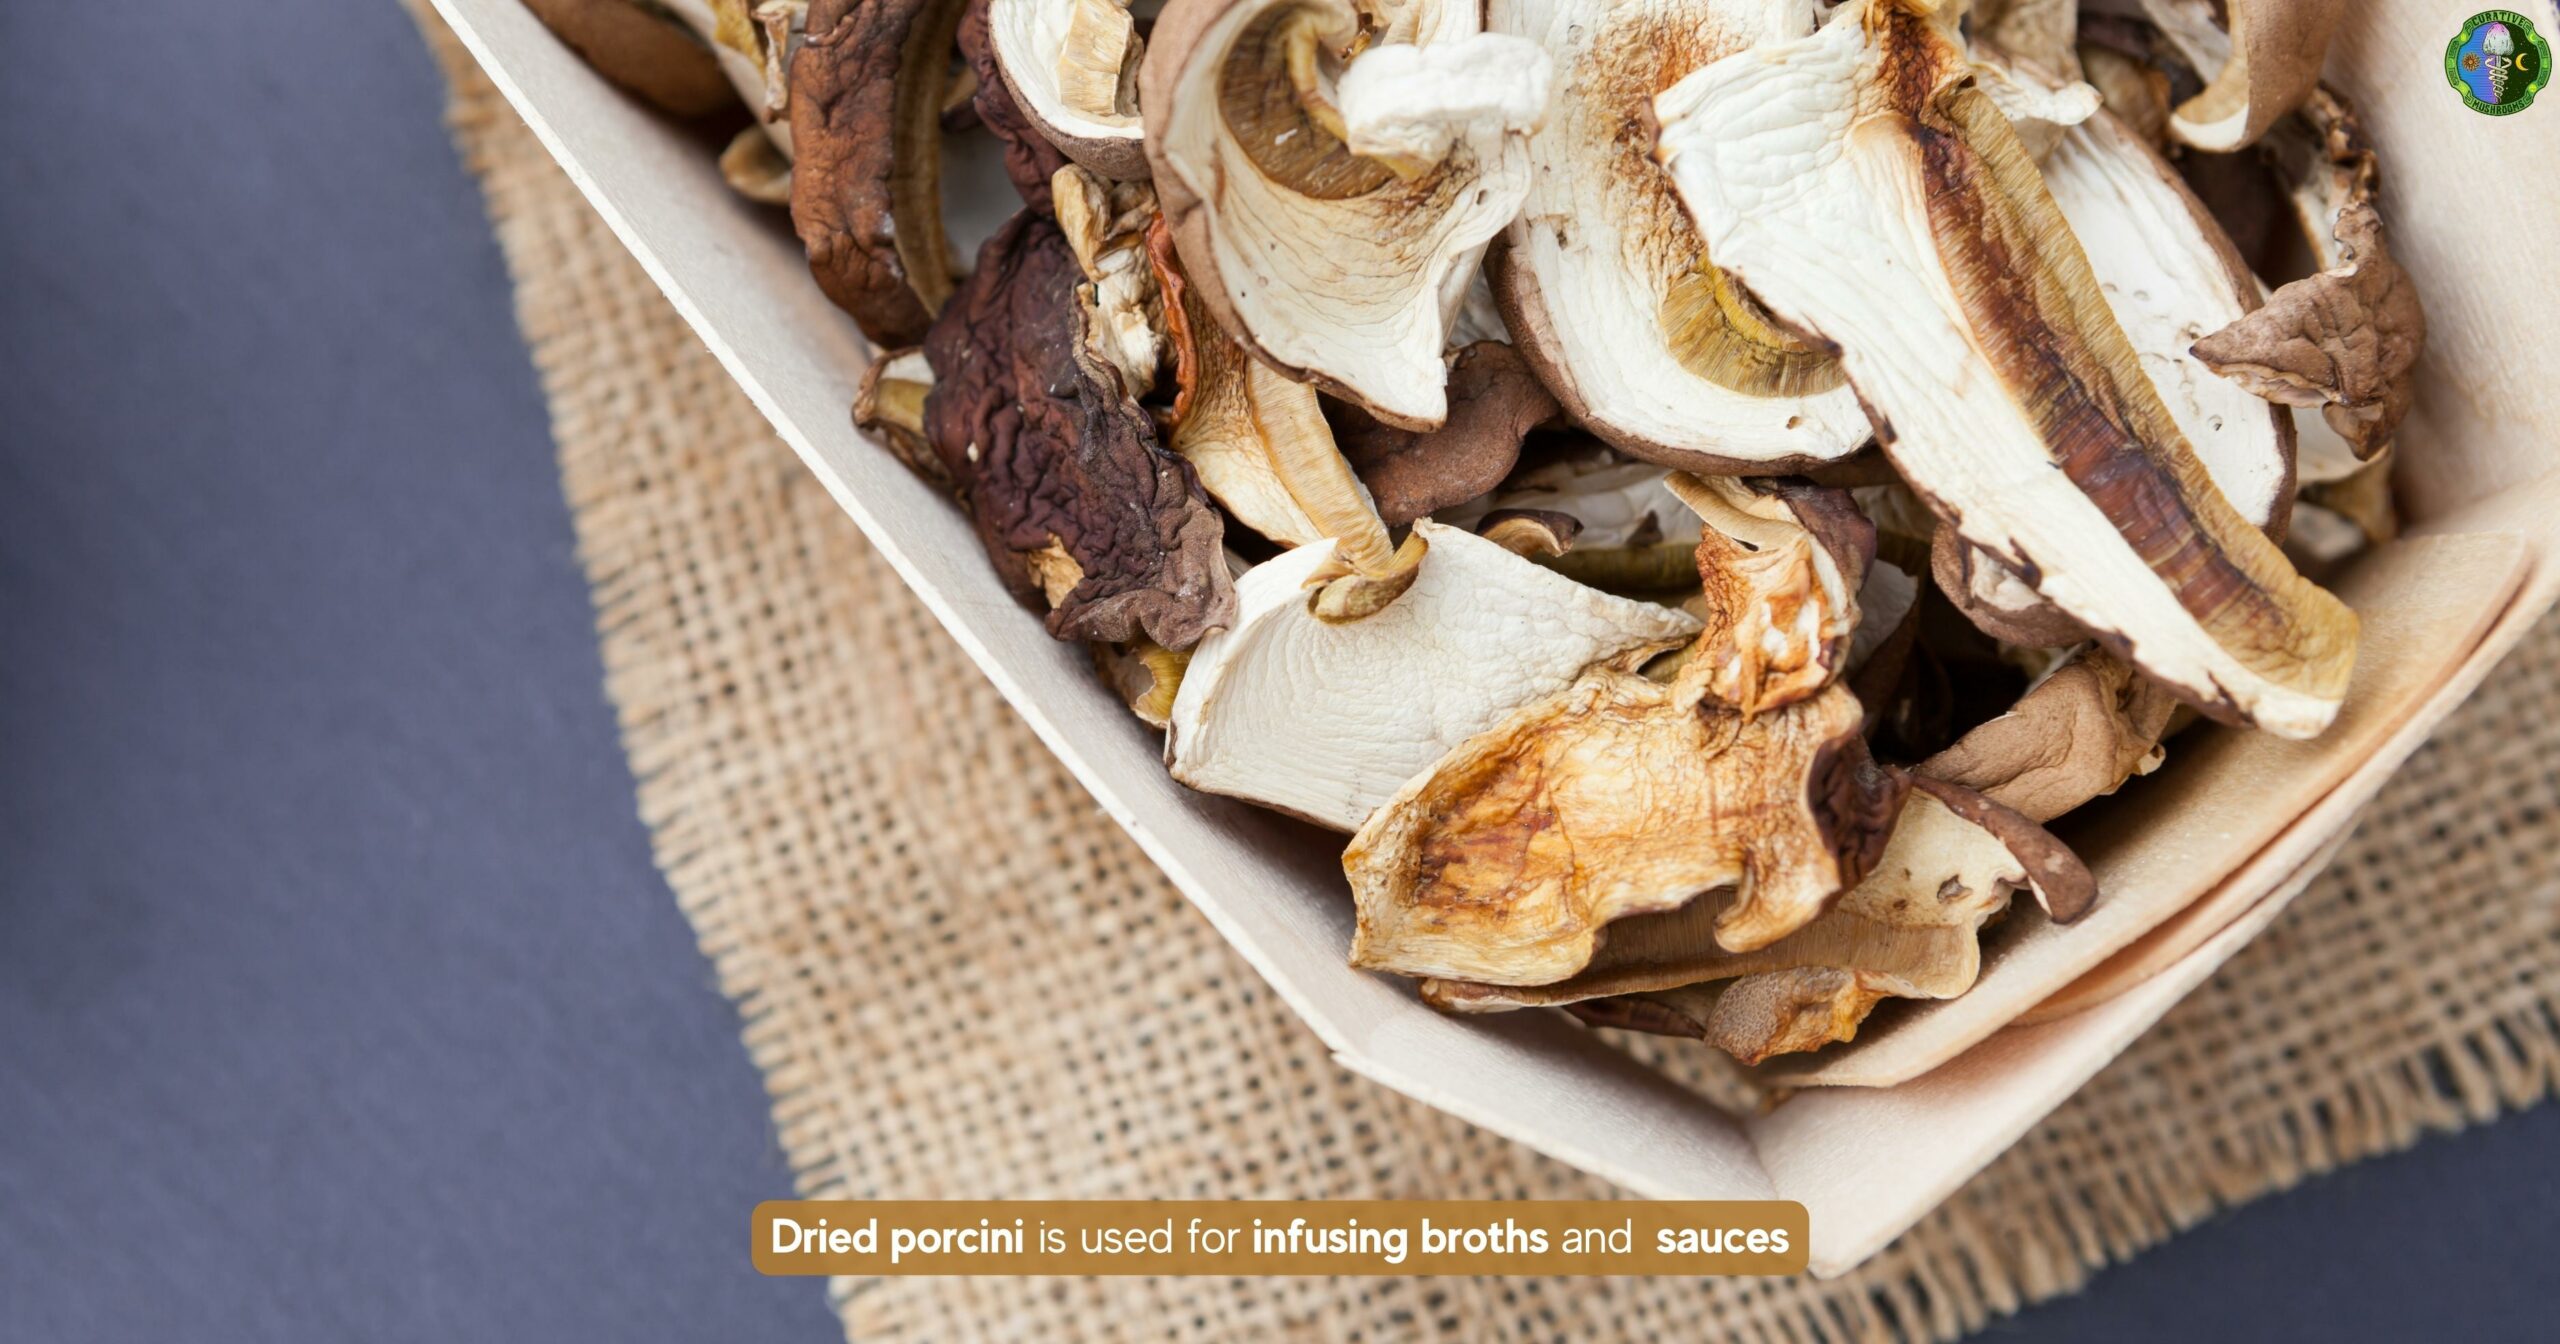 What does dried porcini taste like - for infusing broths and sauces - slightly chewy texture and intense flavor when rehydrated